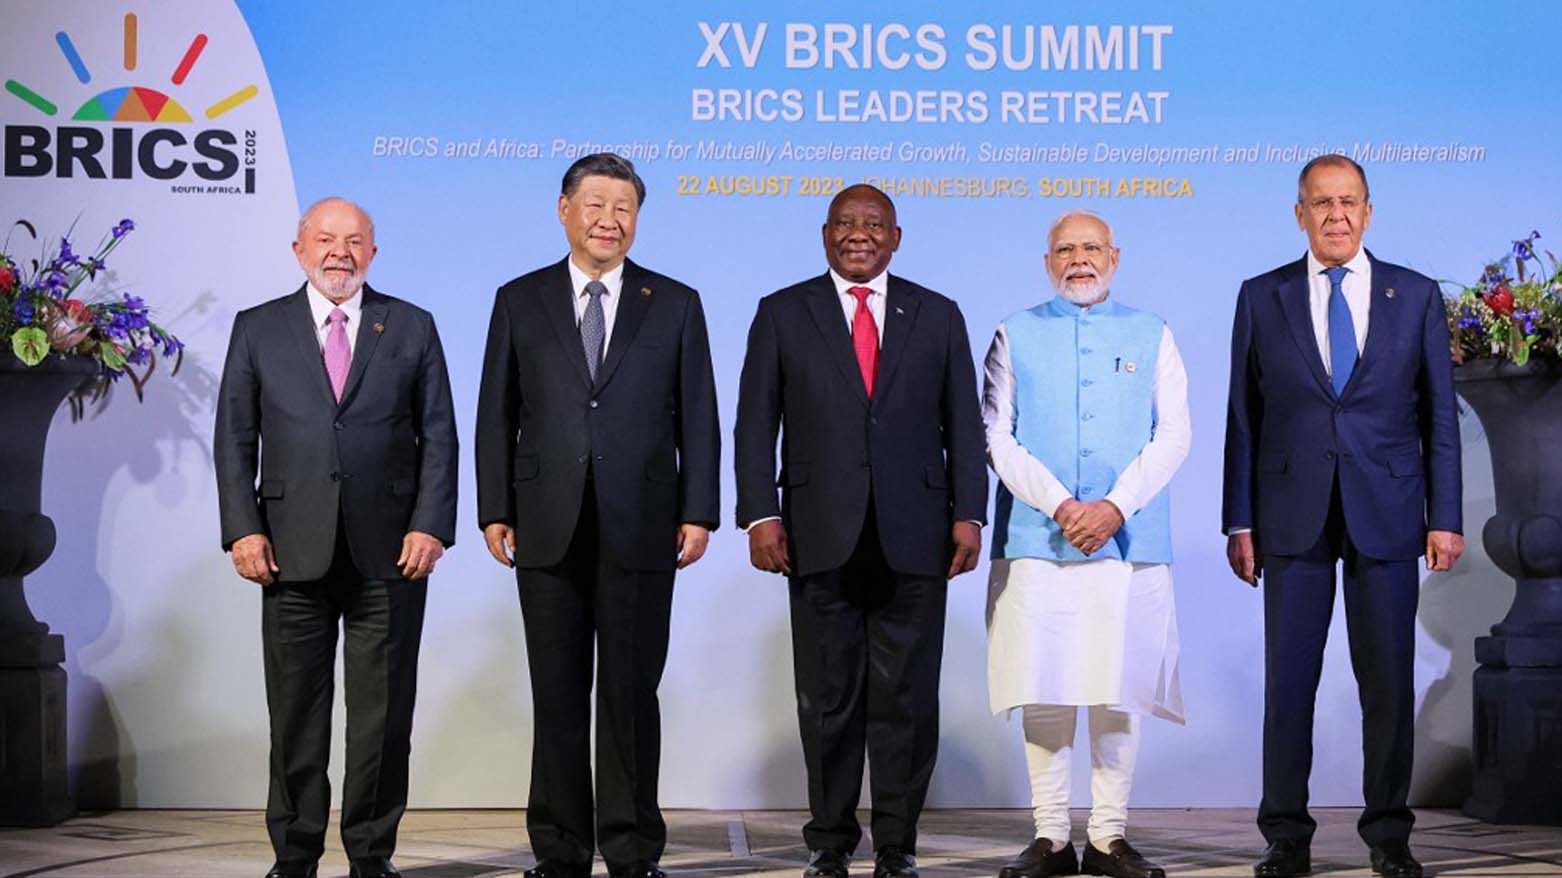 Leaders of BRICS countries pose for a group photo on the inauguration of the 15th summit of the grouping in Johannesburg, South Africa, August 22, 2023. (Photo: Russian Foreign Ministry/HO/AFP)